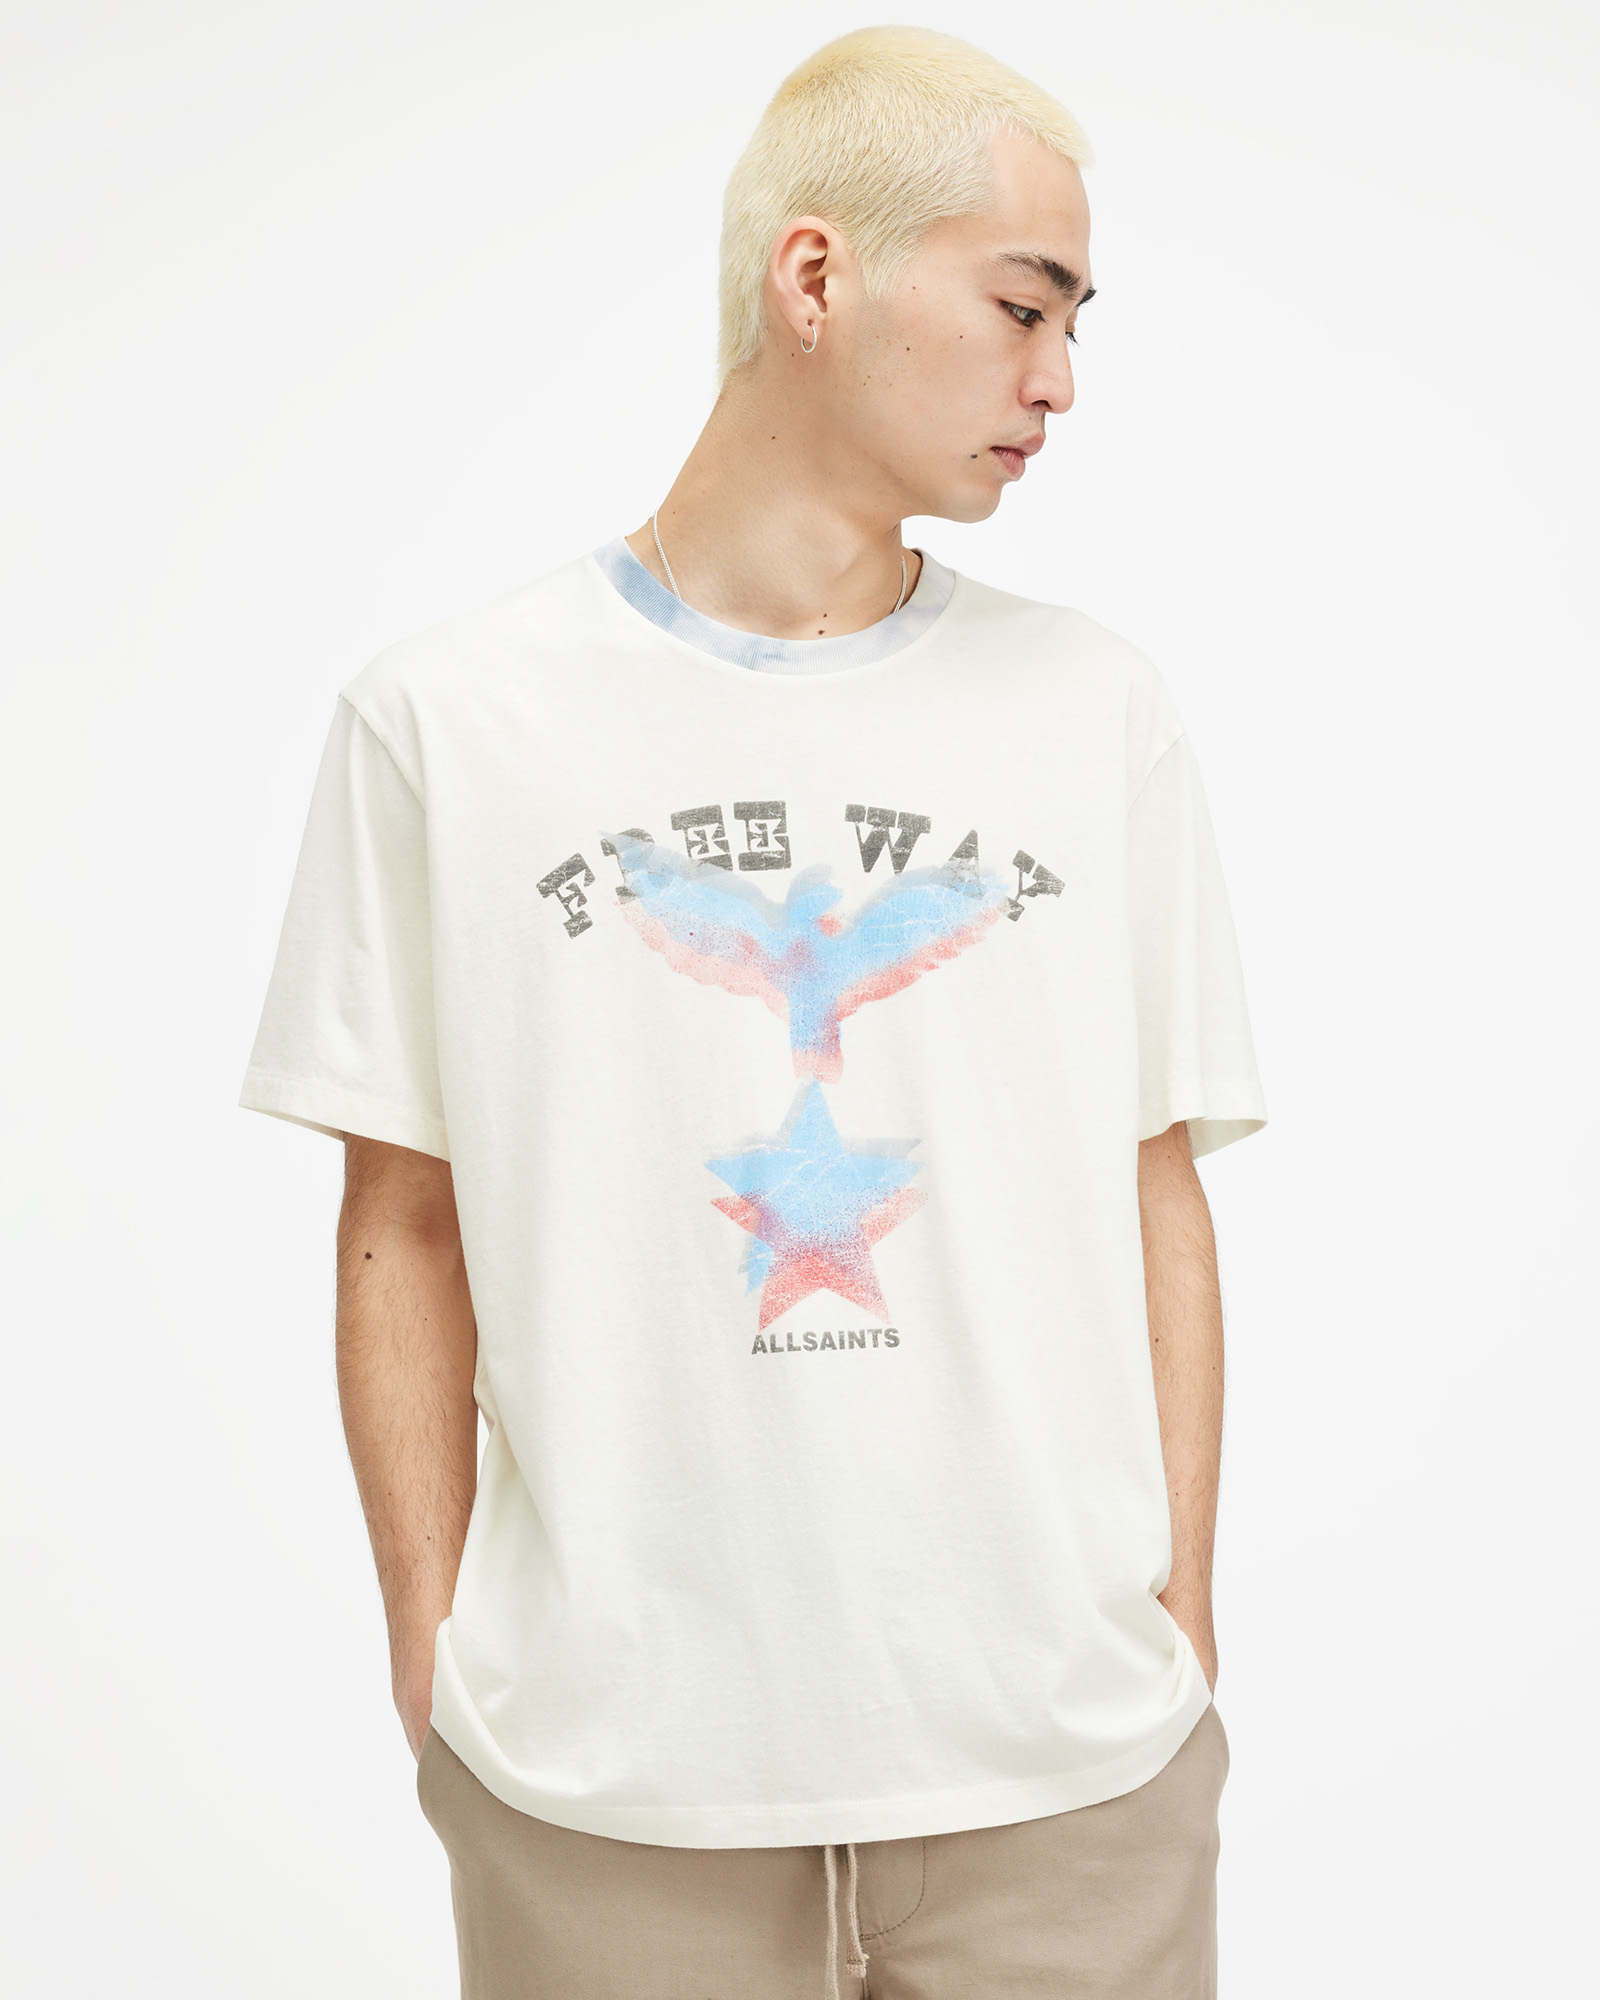 AllSaints Indy Relaxed Fit Crew Neck T-Shirt,, CALA WHITE